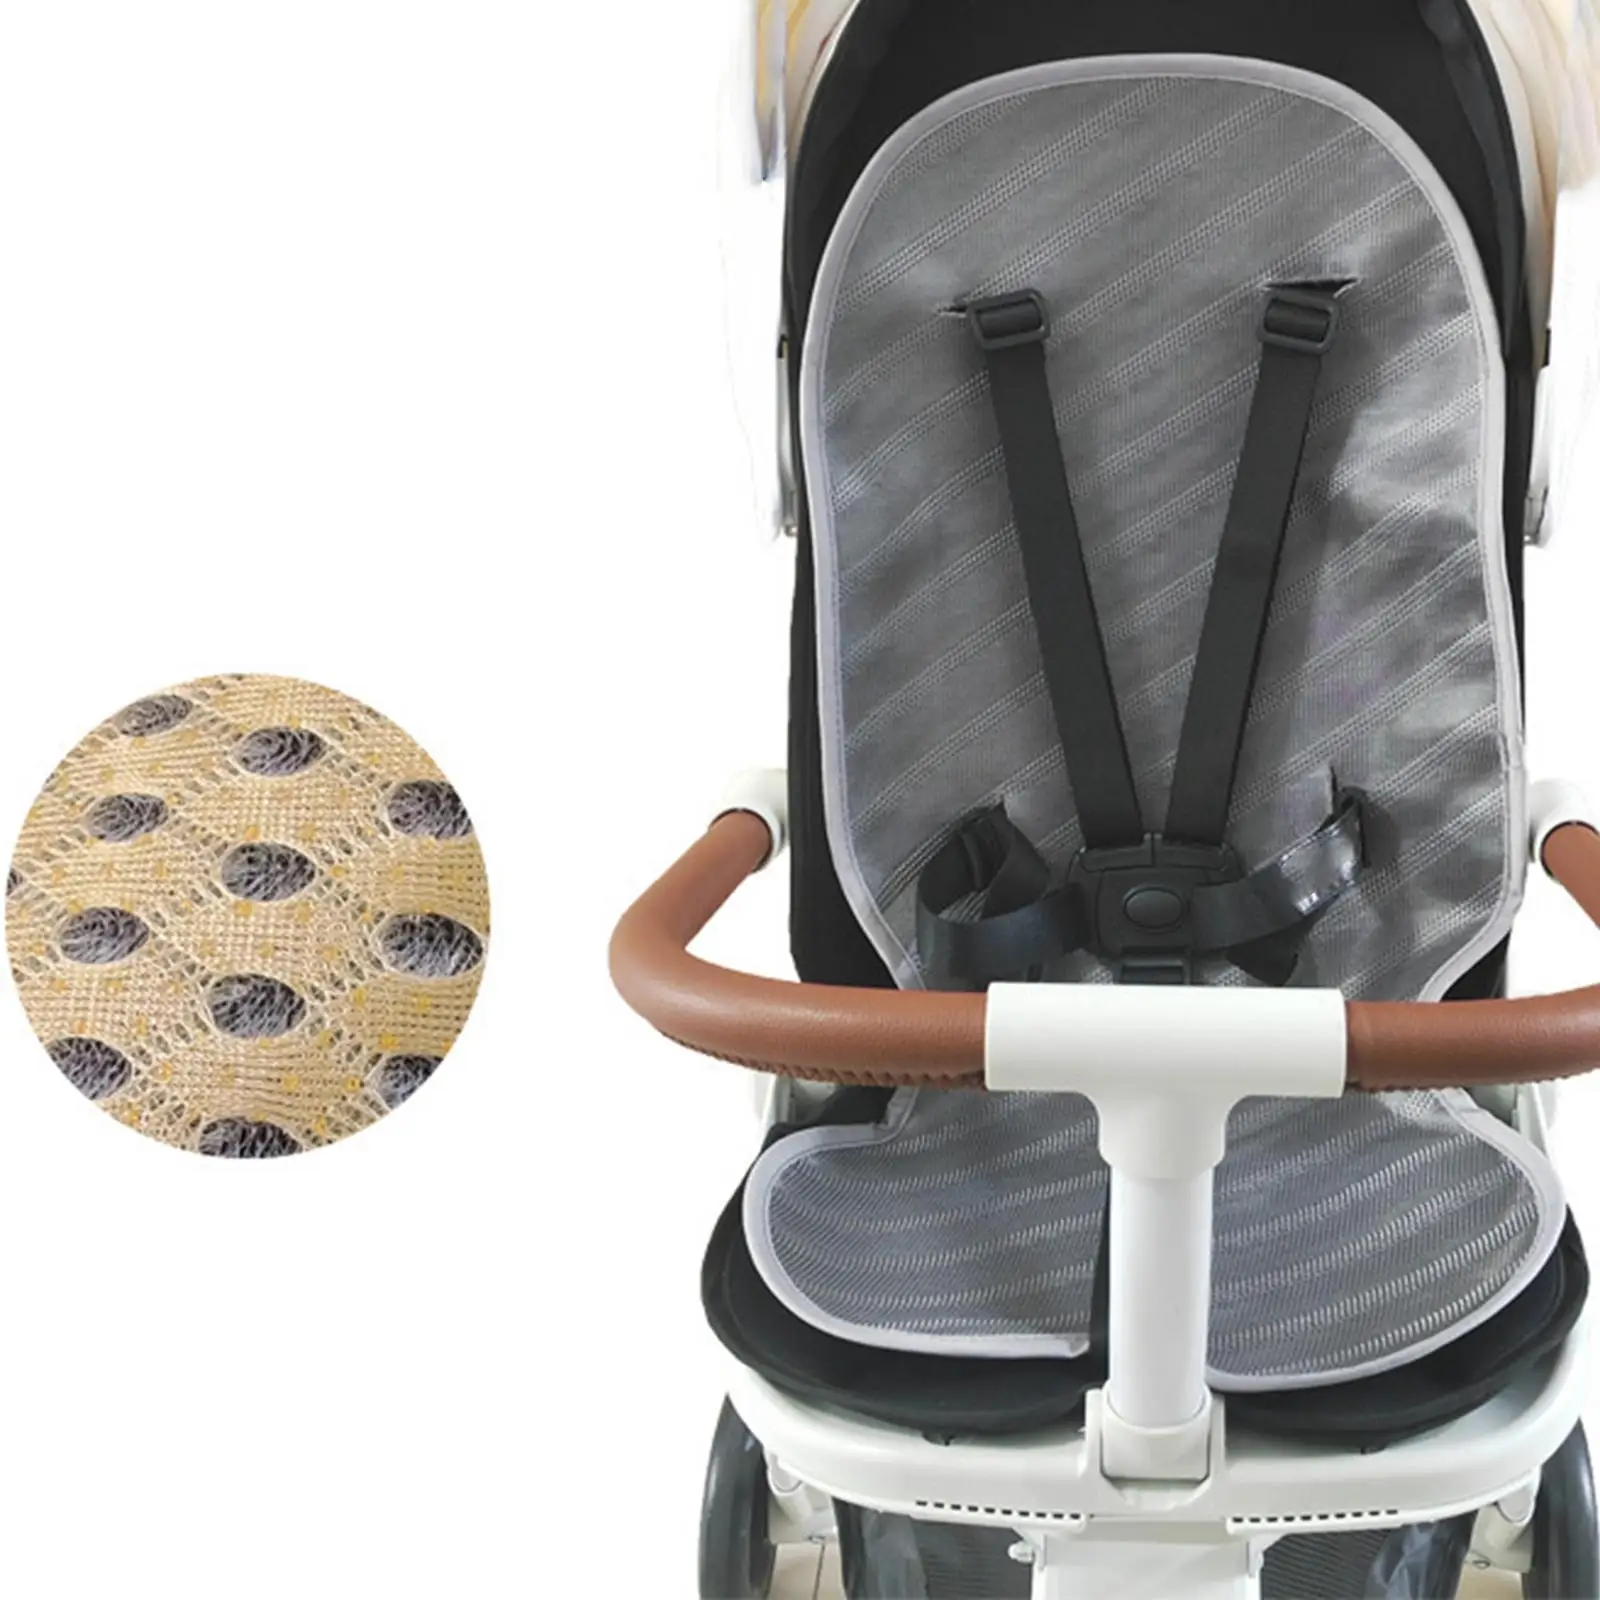 Summer Cooling Seat Pad Comfortable Strollers Cooling Pad for Pushchair Strollers Baby Dining Chair Trolley Child Safety Seat